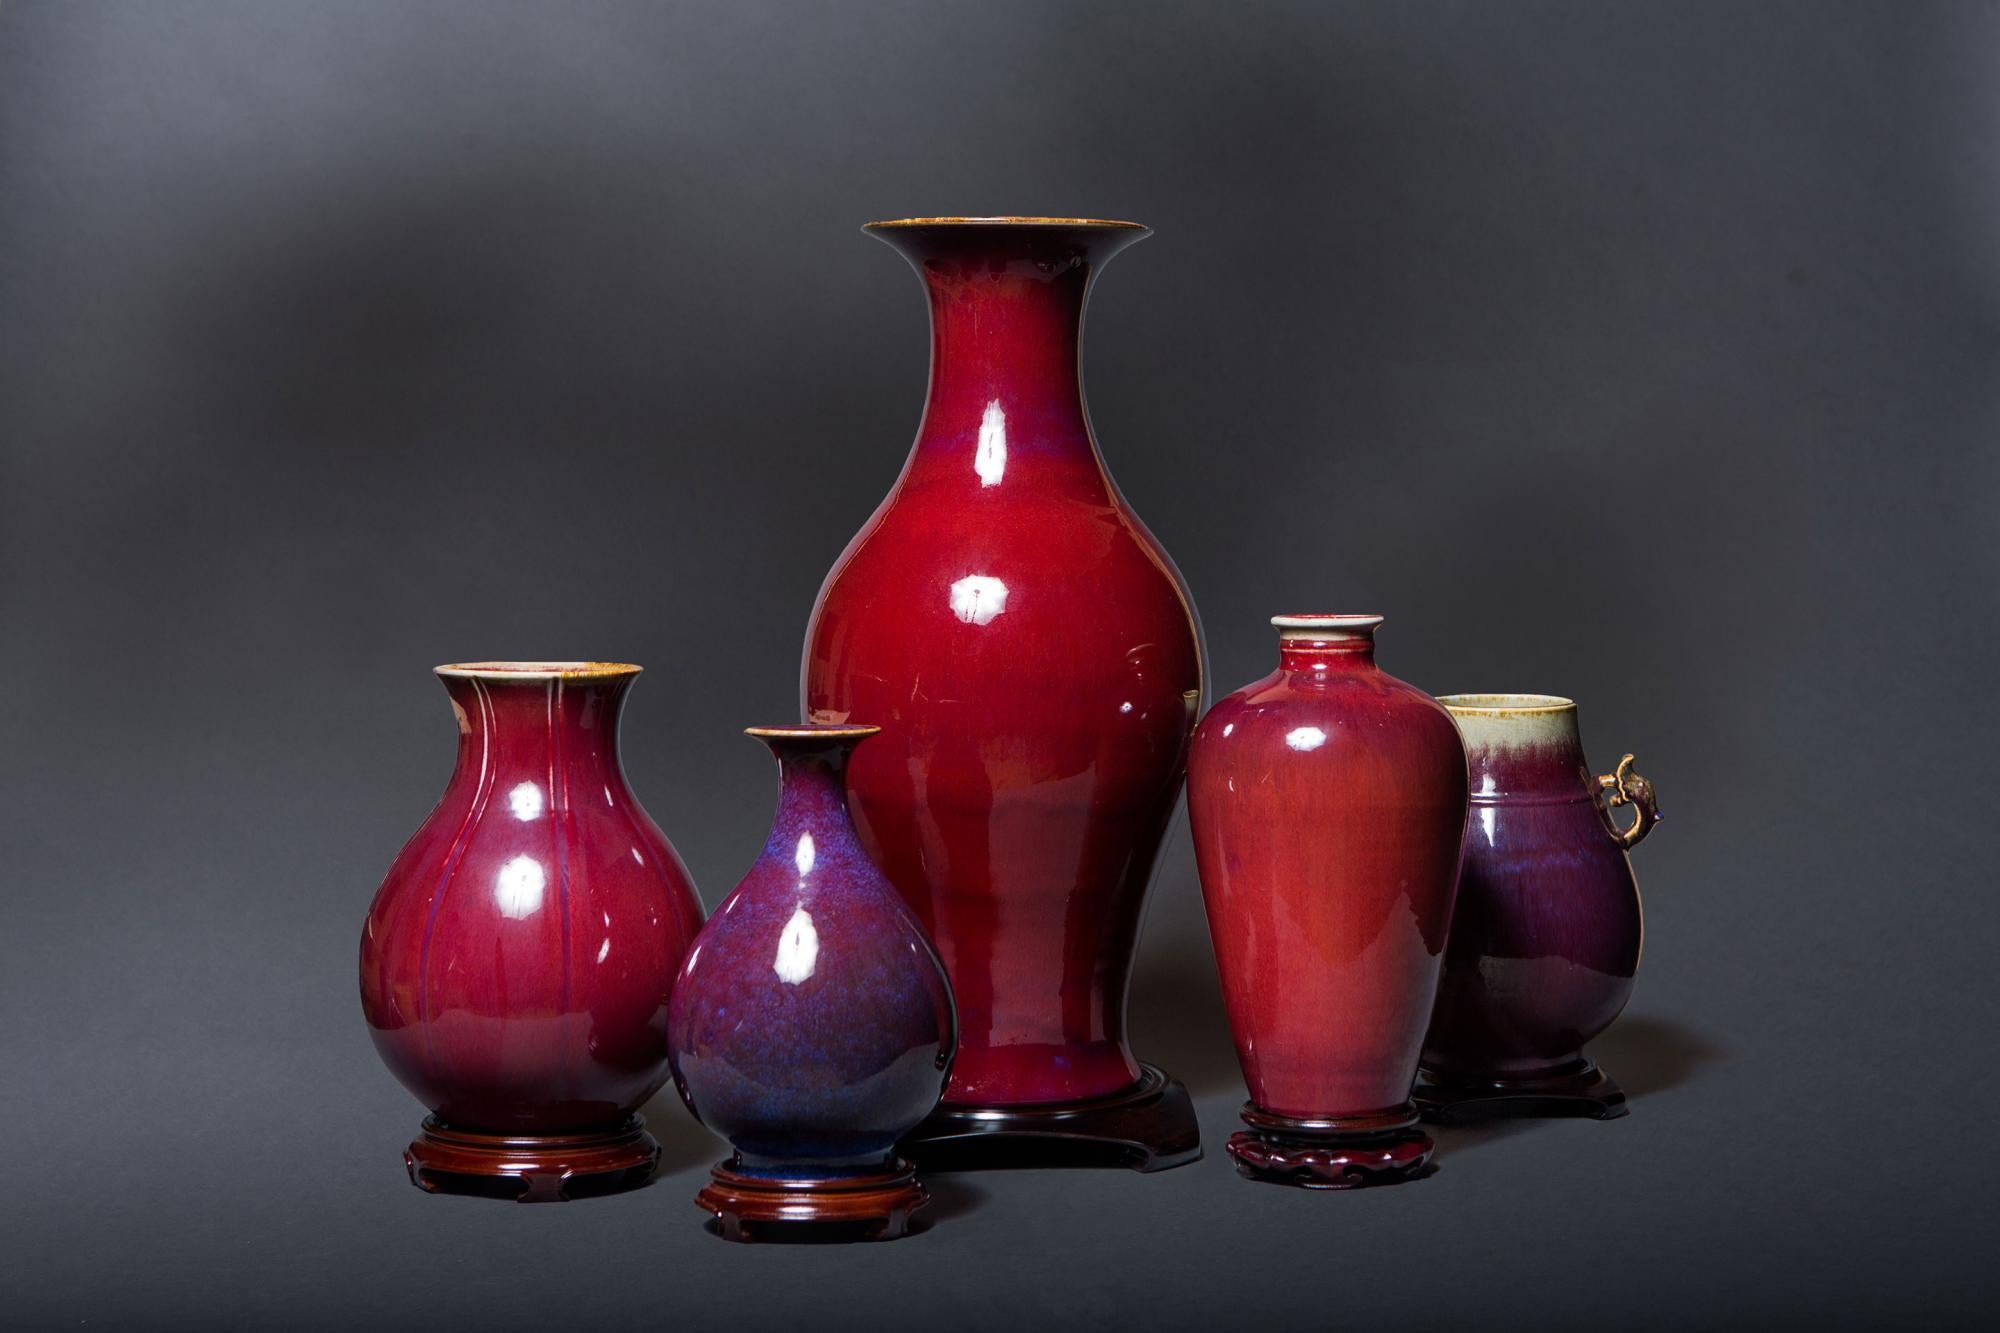 Material: Ceramic 
Origin: China
Age: Ching dynasty, Chia Ching period, circa 1800
Size: 14 inches in height 

We have a nice collection of oxblood vases currently. As well as black Chinese vases.

As designers we plant these vases with